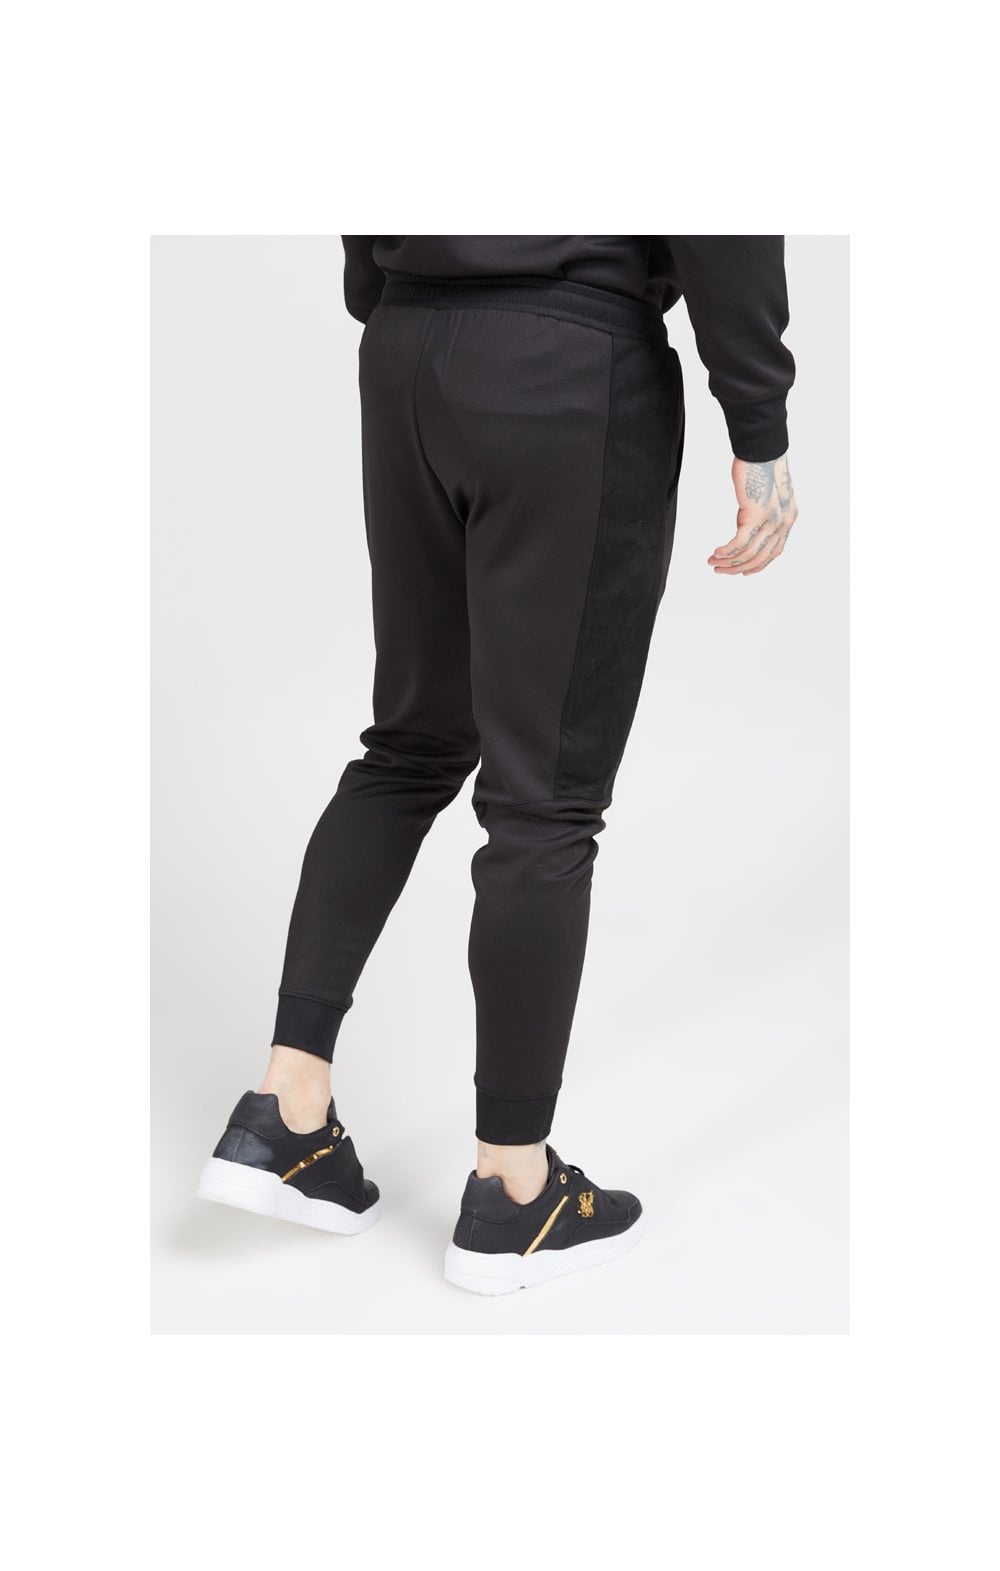 SikSilk Fitted Panel Cuff Pants – Black & Gold (3)